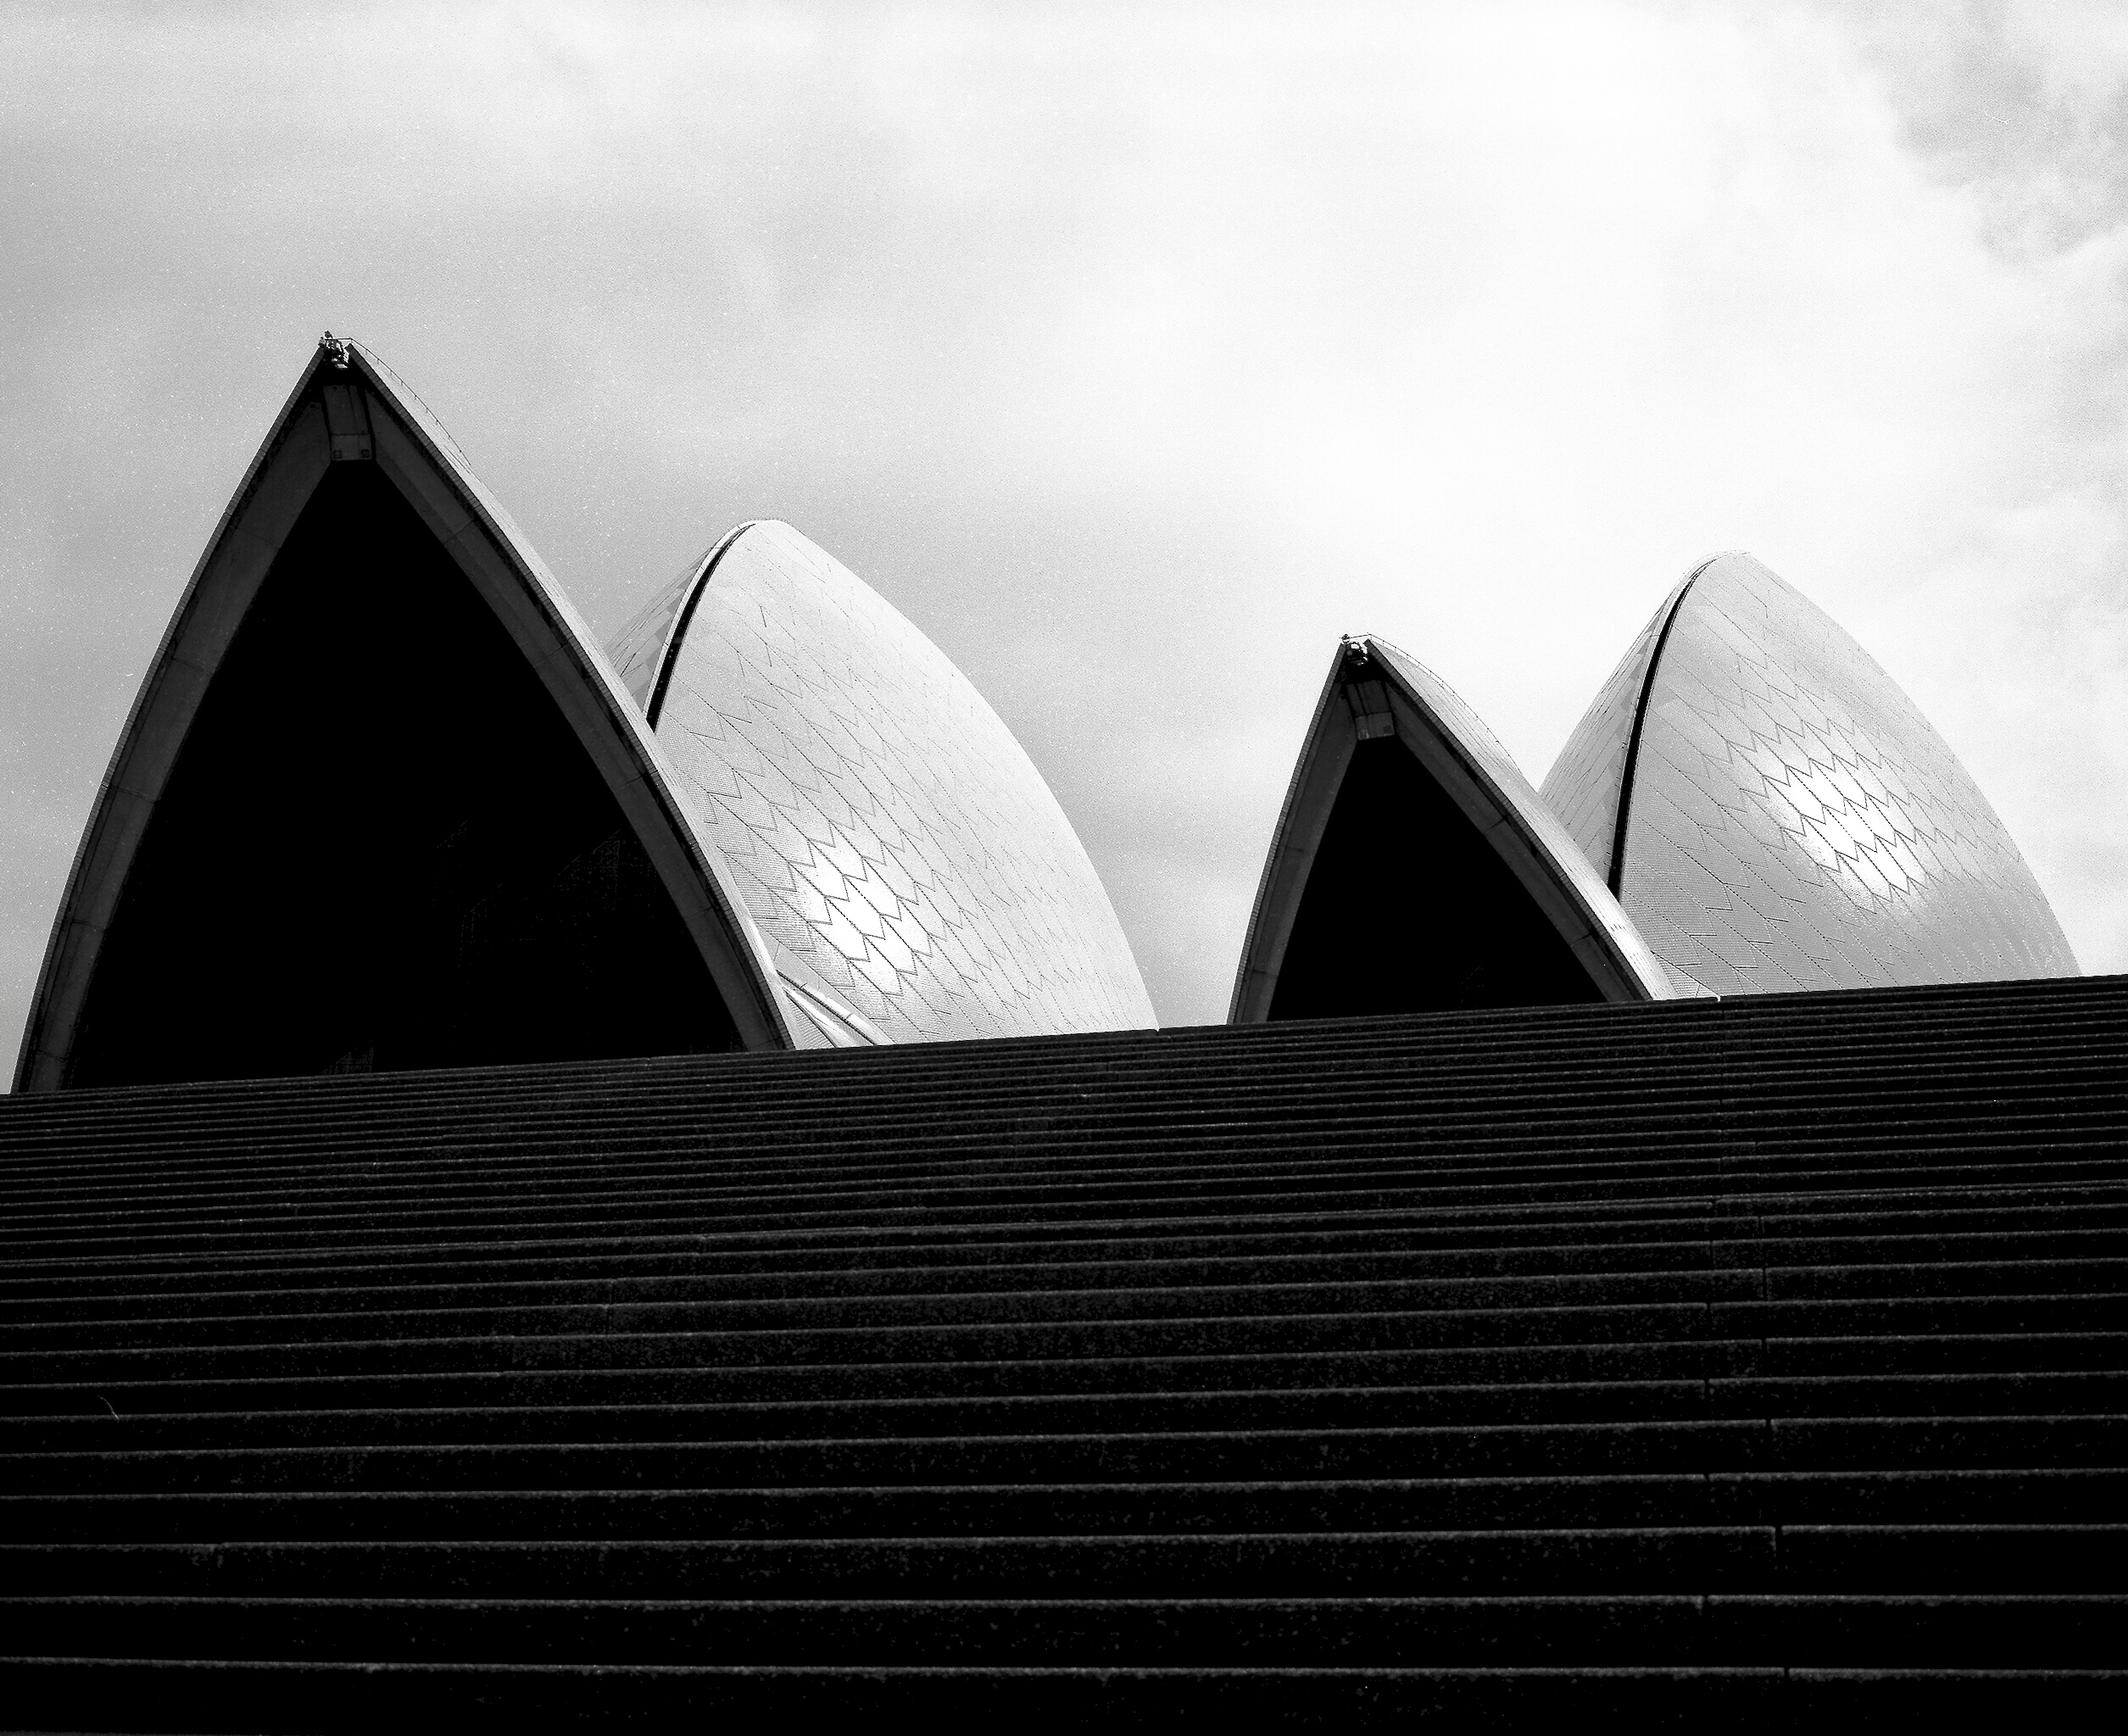 Sydney Opera House Stairs. Taken in October 2018, with Mamiya 7ii and 80mm lens, and Kodak T-Max 100 120 film